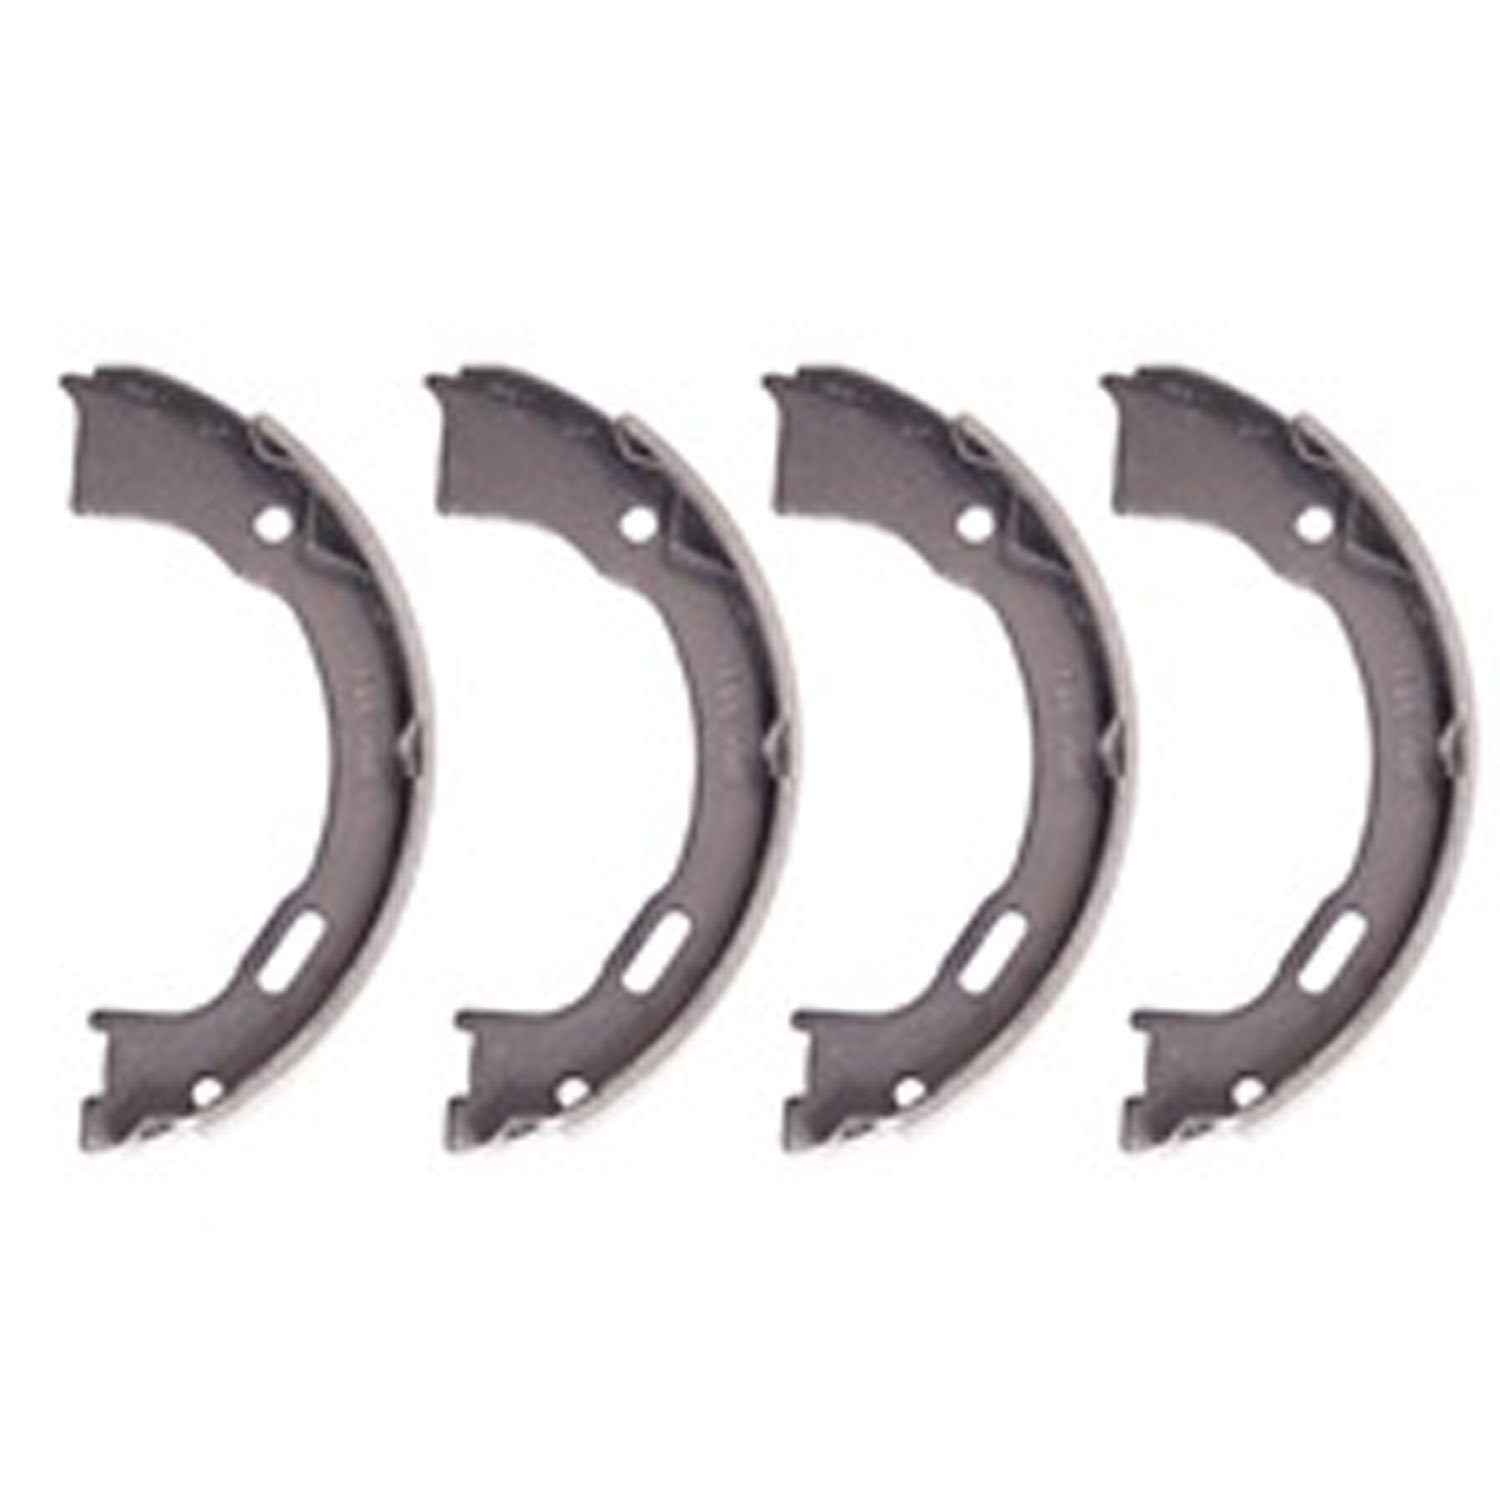 Emergency Brake Shoes for 1994-1998 Jeep Grand Cherokee